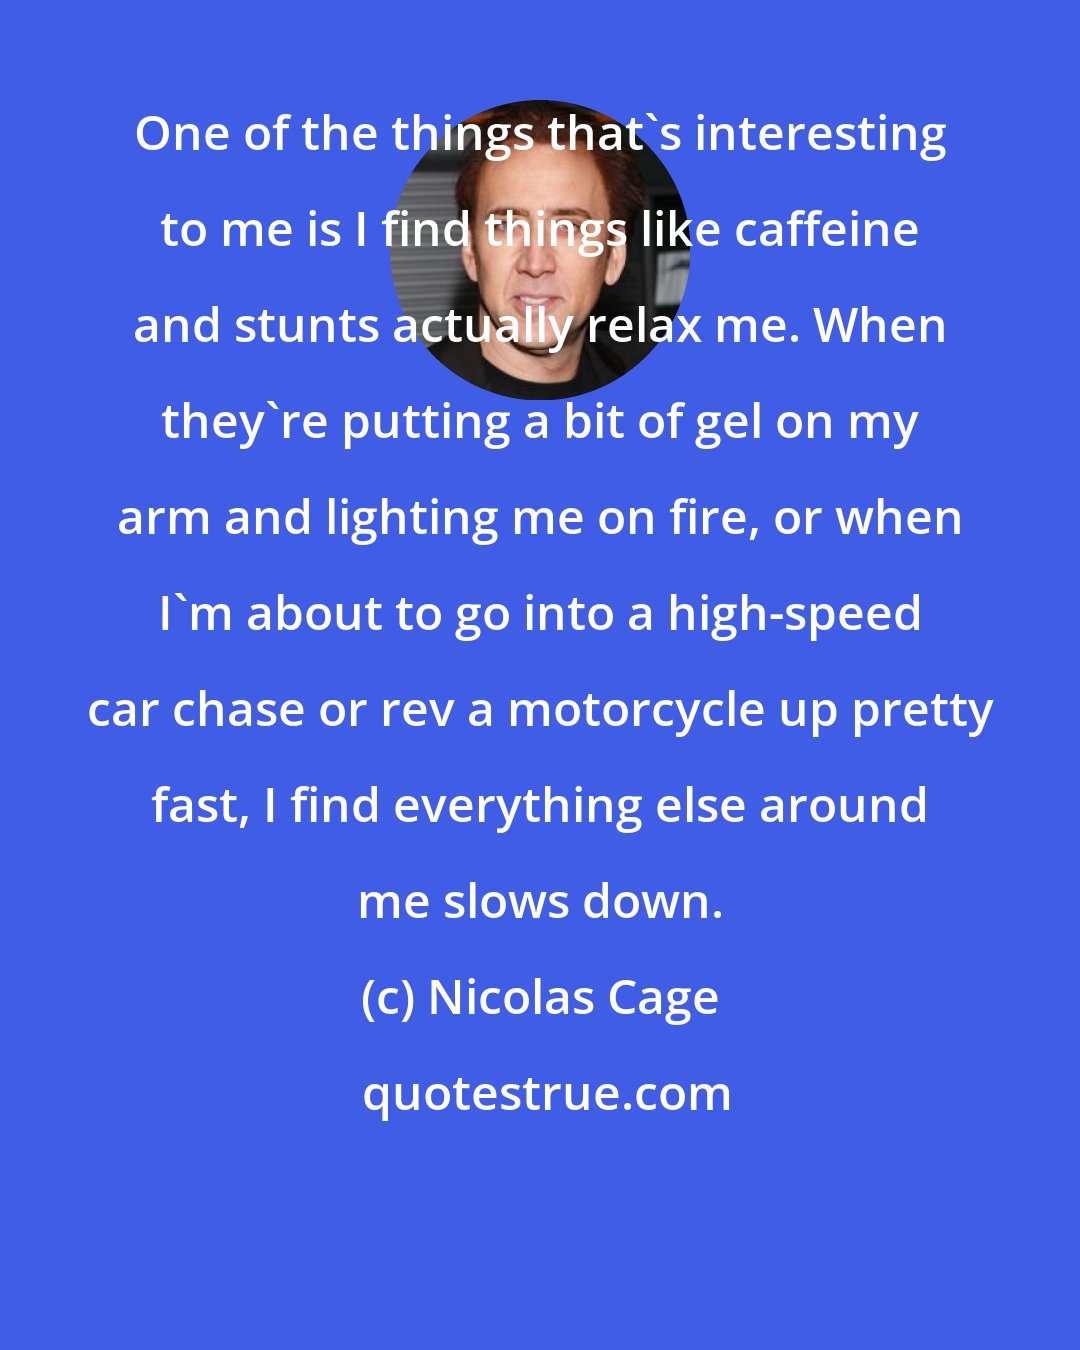 Nicolas Cage: One of the things that's interesting to me is I find things like caffeine and stunts actually relax me. When they're putting a bit of gel on my arm and lighting me on fire, or when I'm about to go into a high-speed car chase or rev a motorcycle up pretty fast, I find everything else around me slows down.